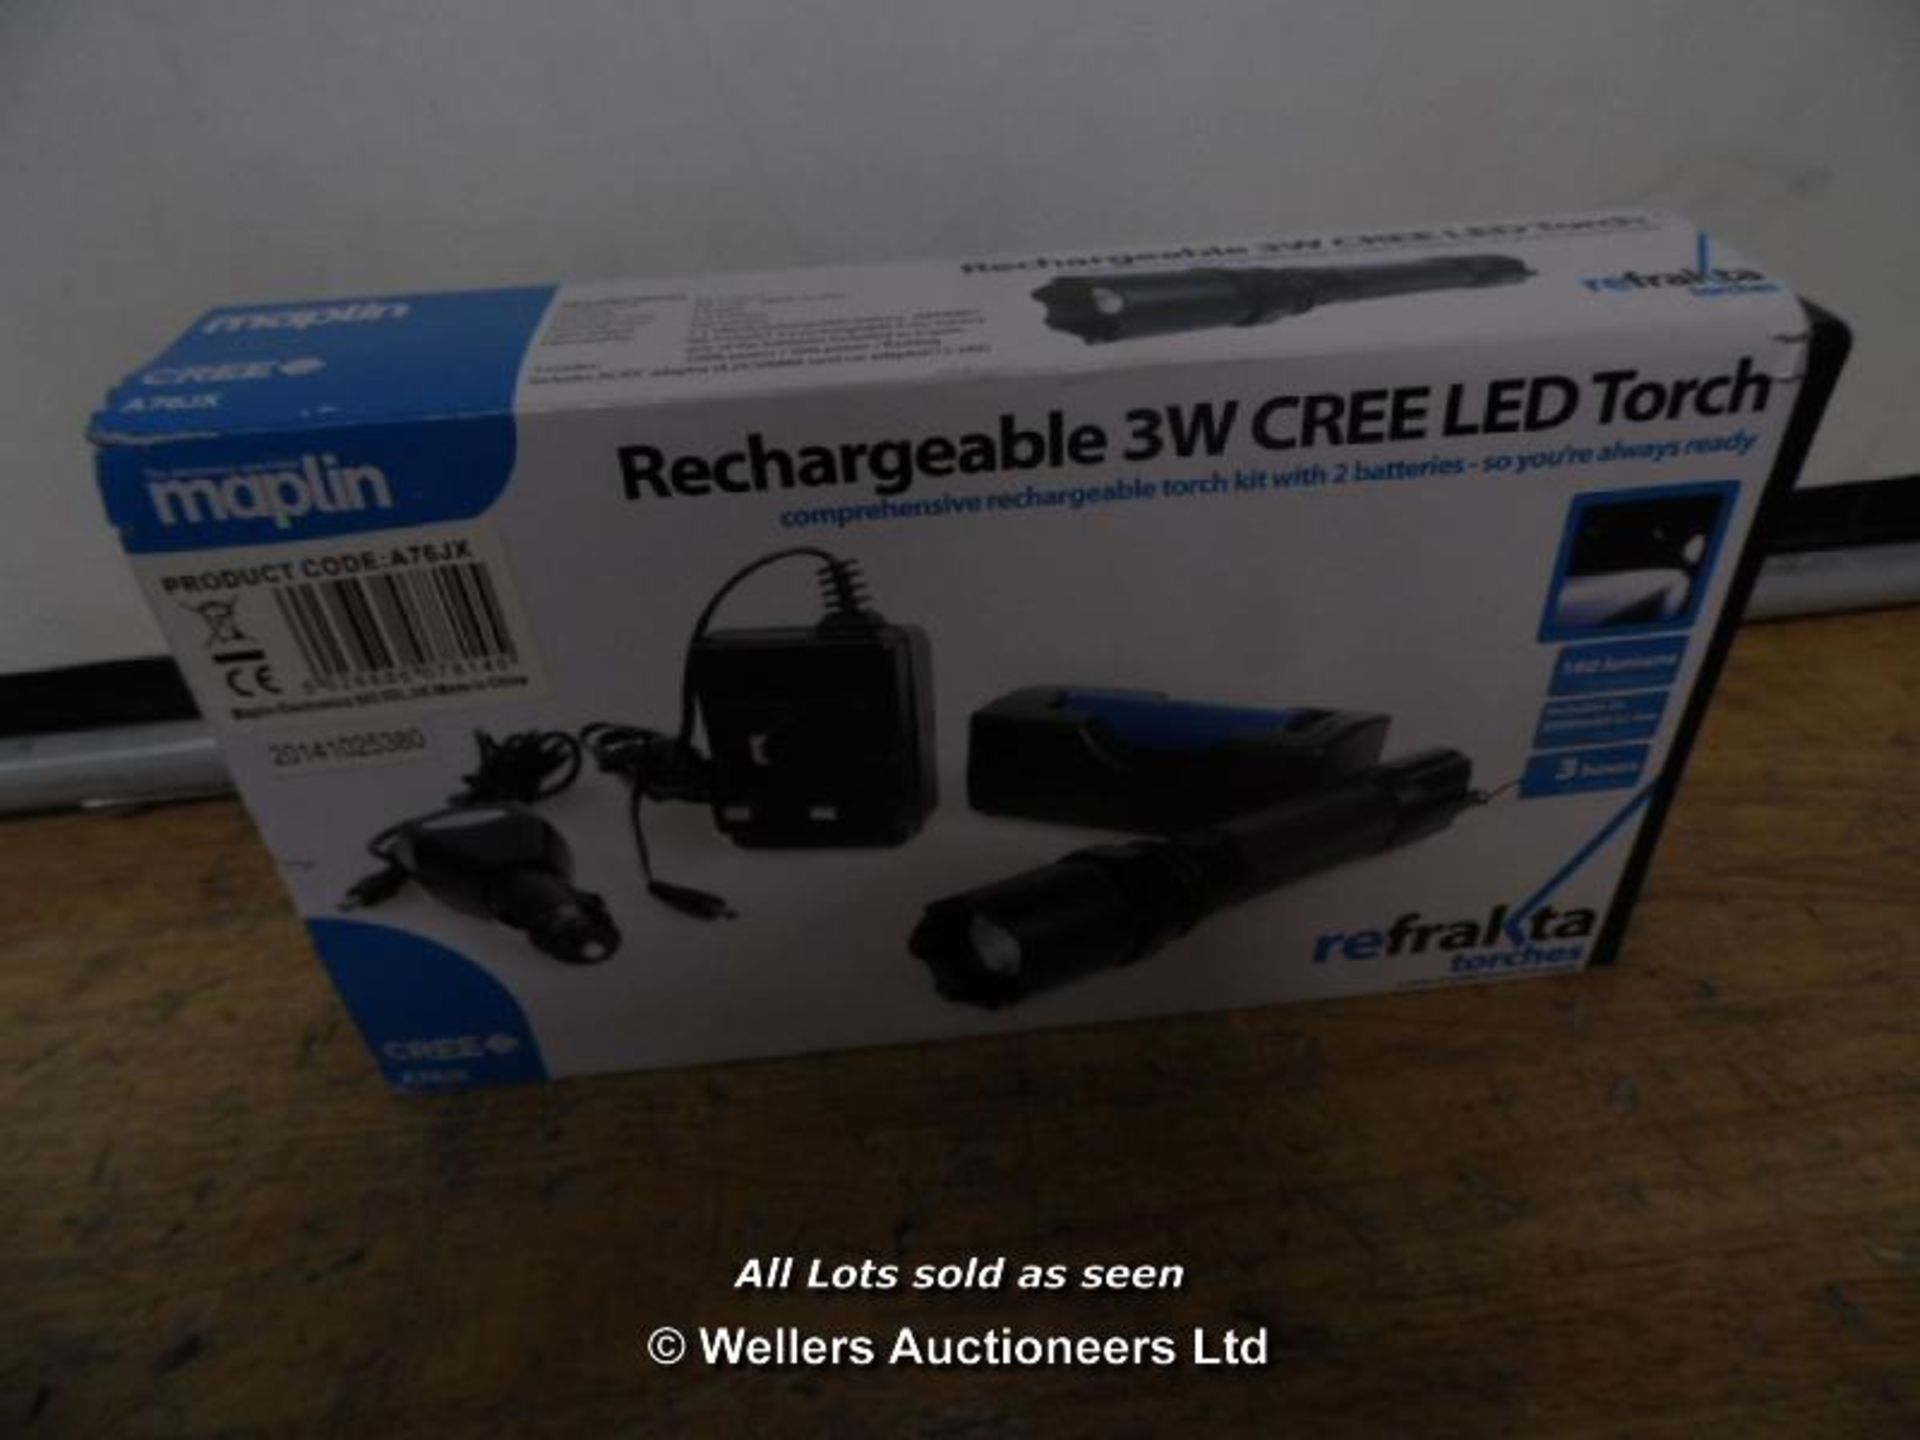 *REFRAKTA 3W RECHARGEABLE TACTICAL LED TORCH_A76JX_5026686078145 / GRADE: RETAIL RETURN / BOXED  (